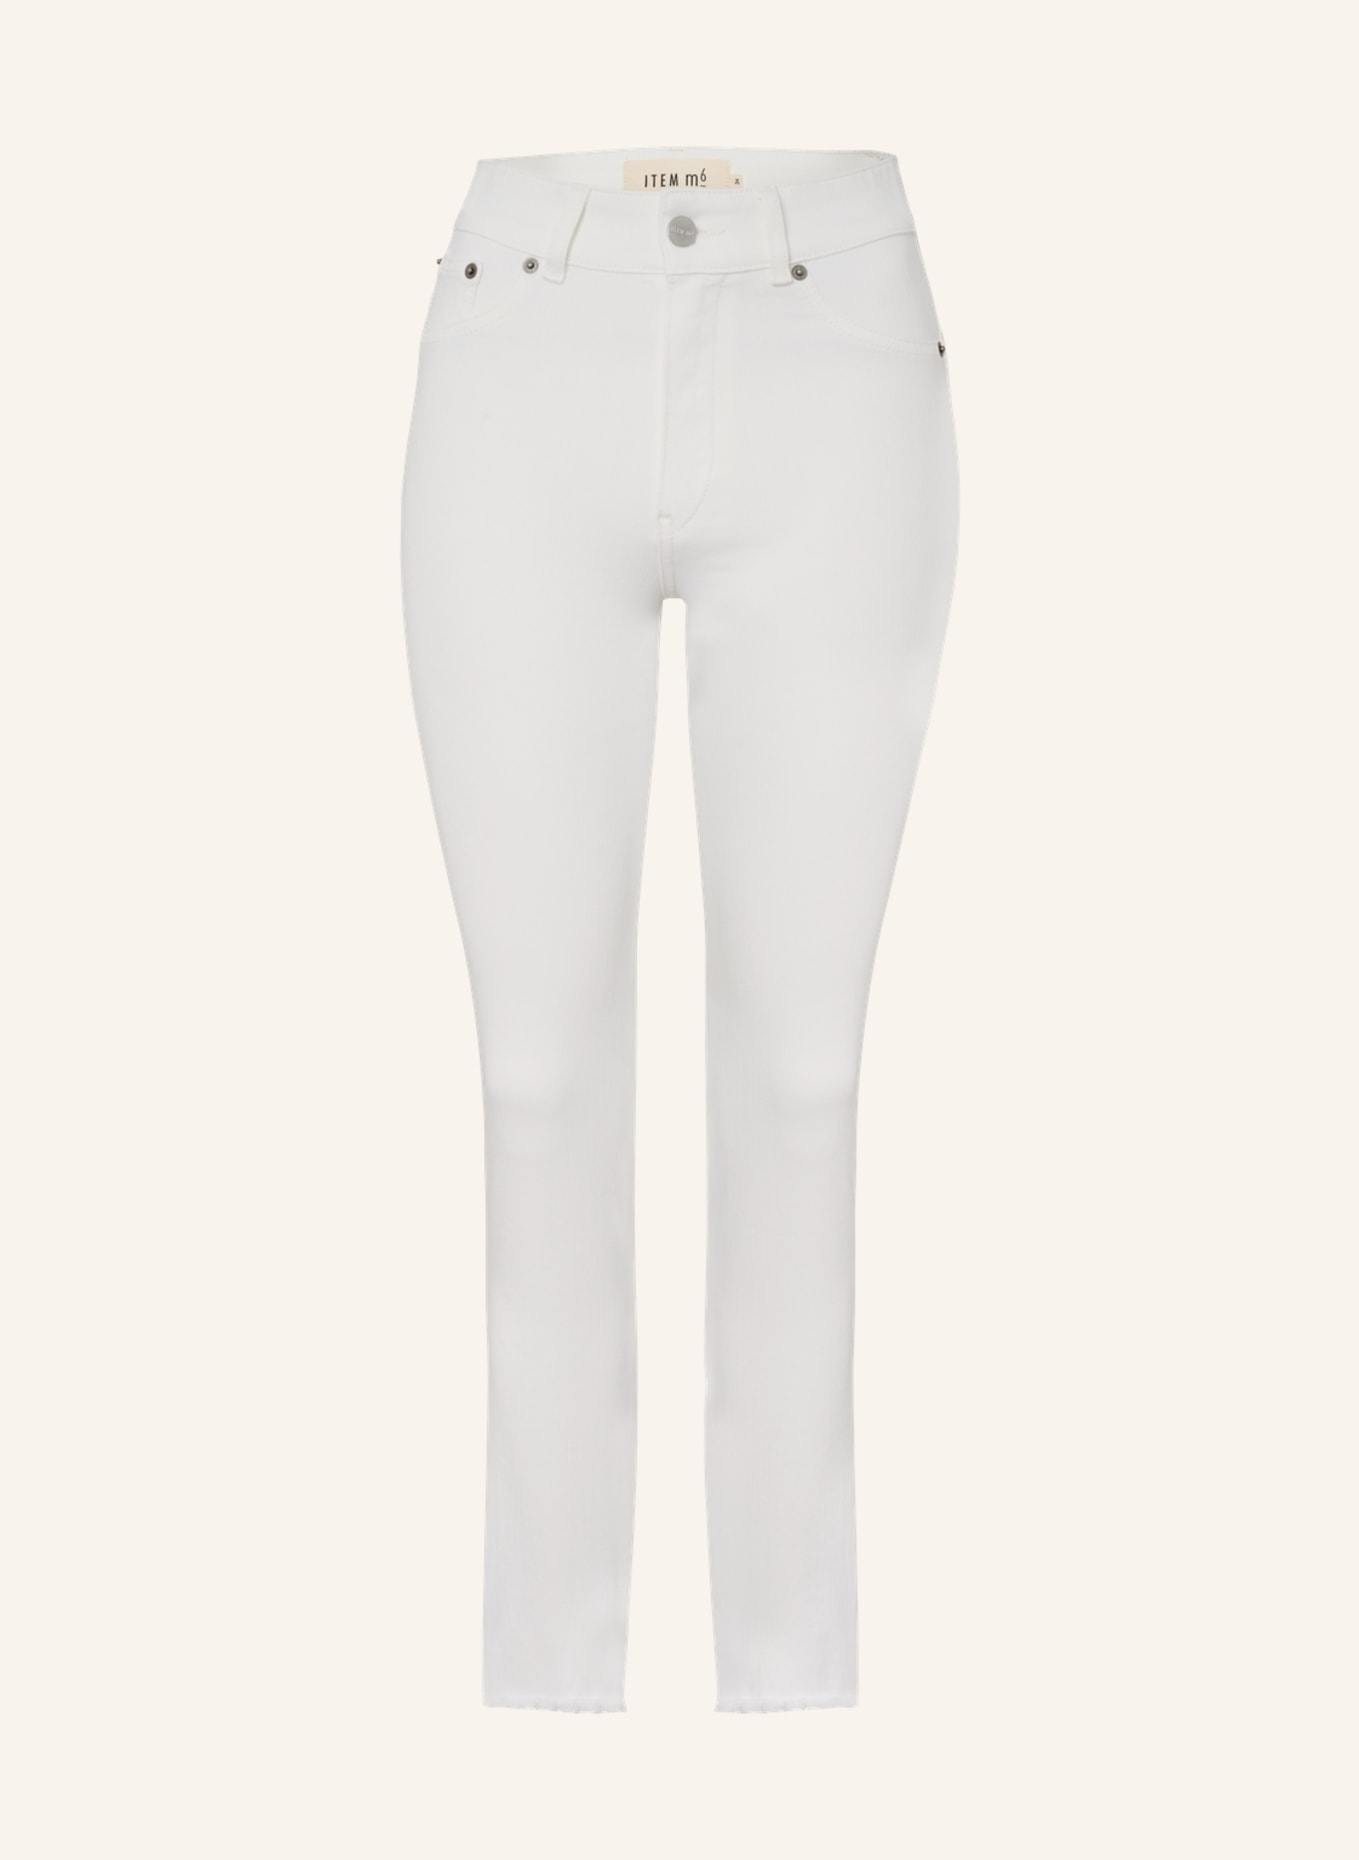 ITEM m6 7/8-Jeans CROPPED HIGH RISE mit Shaping-Effekt, Farbe: WEISS (Bild 1)